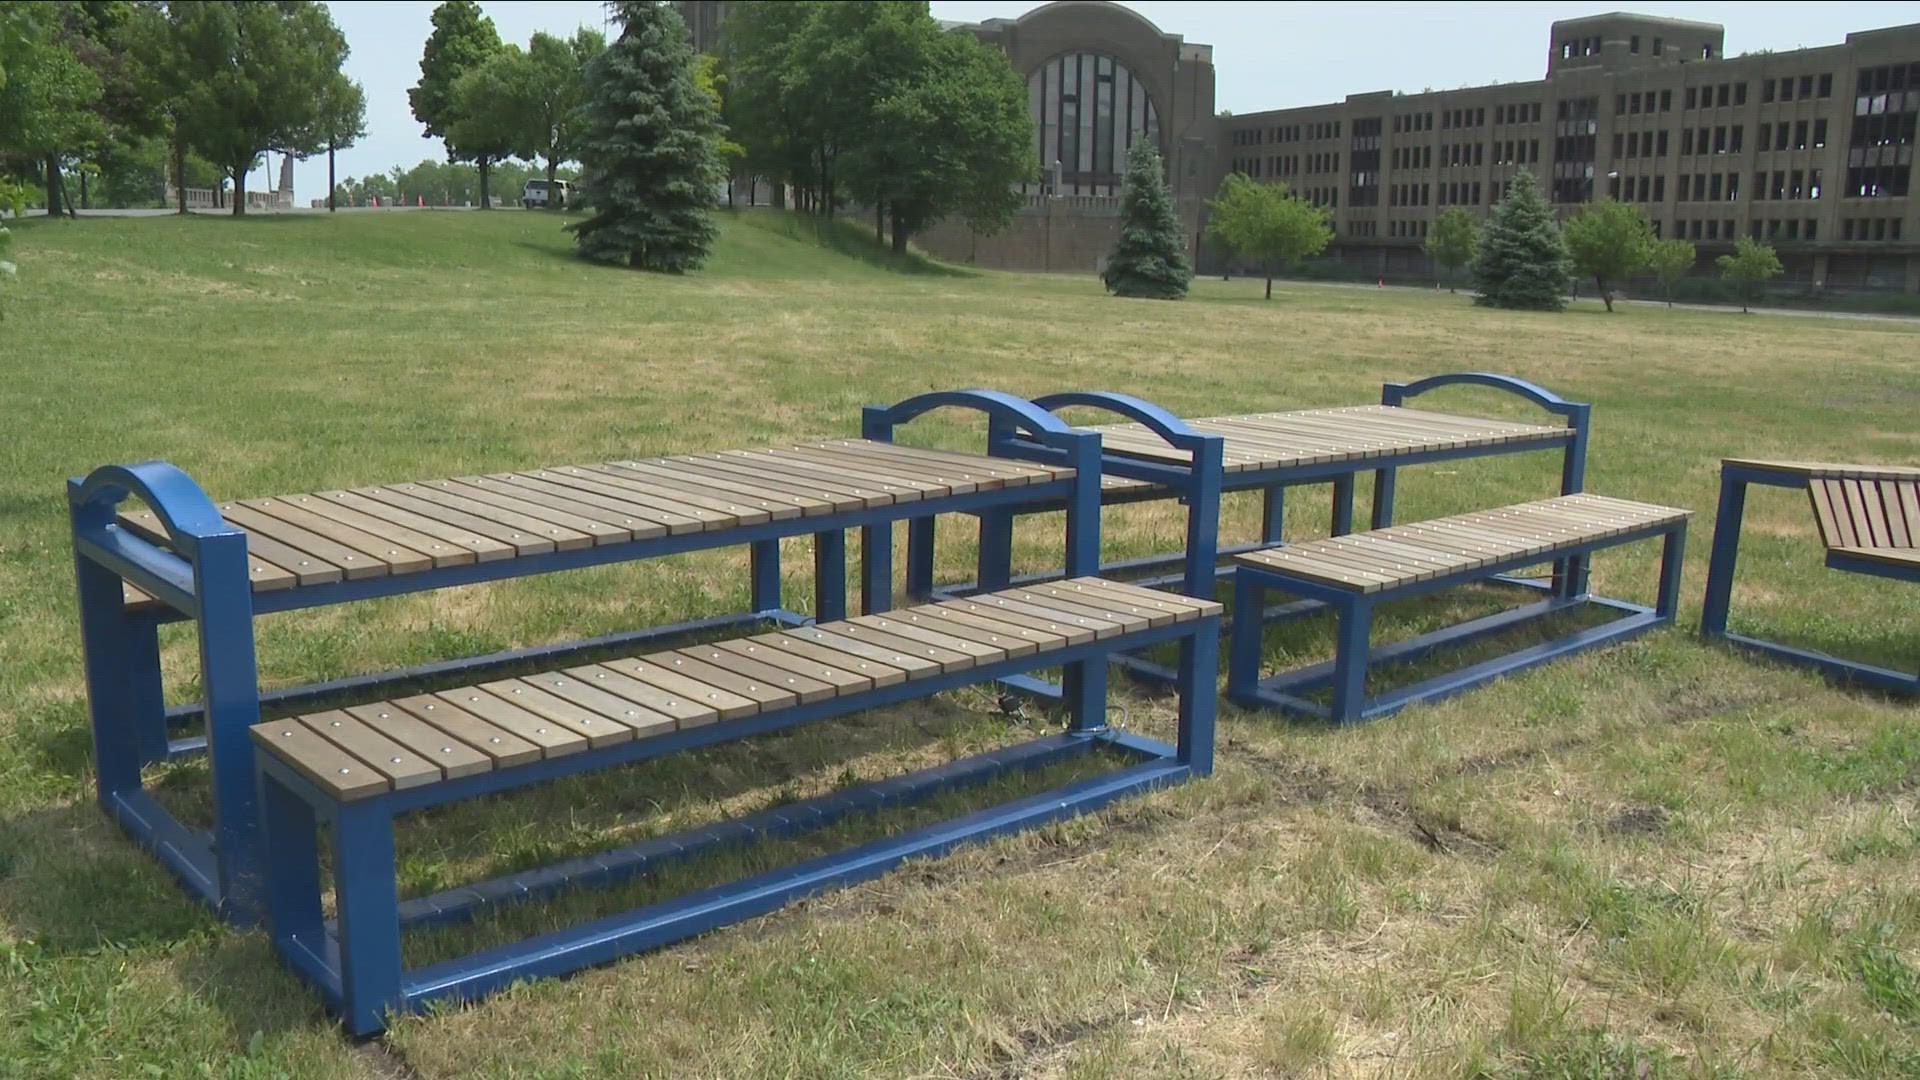 two hand-made community benches were stolen from the Buffalo Central Terminal's Great Lawn... which are used year-round by the community at concerts, events, parties